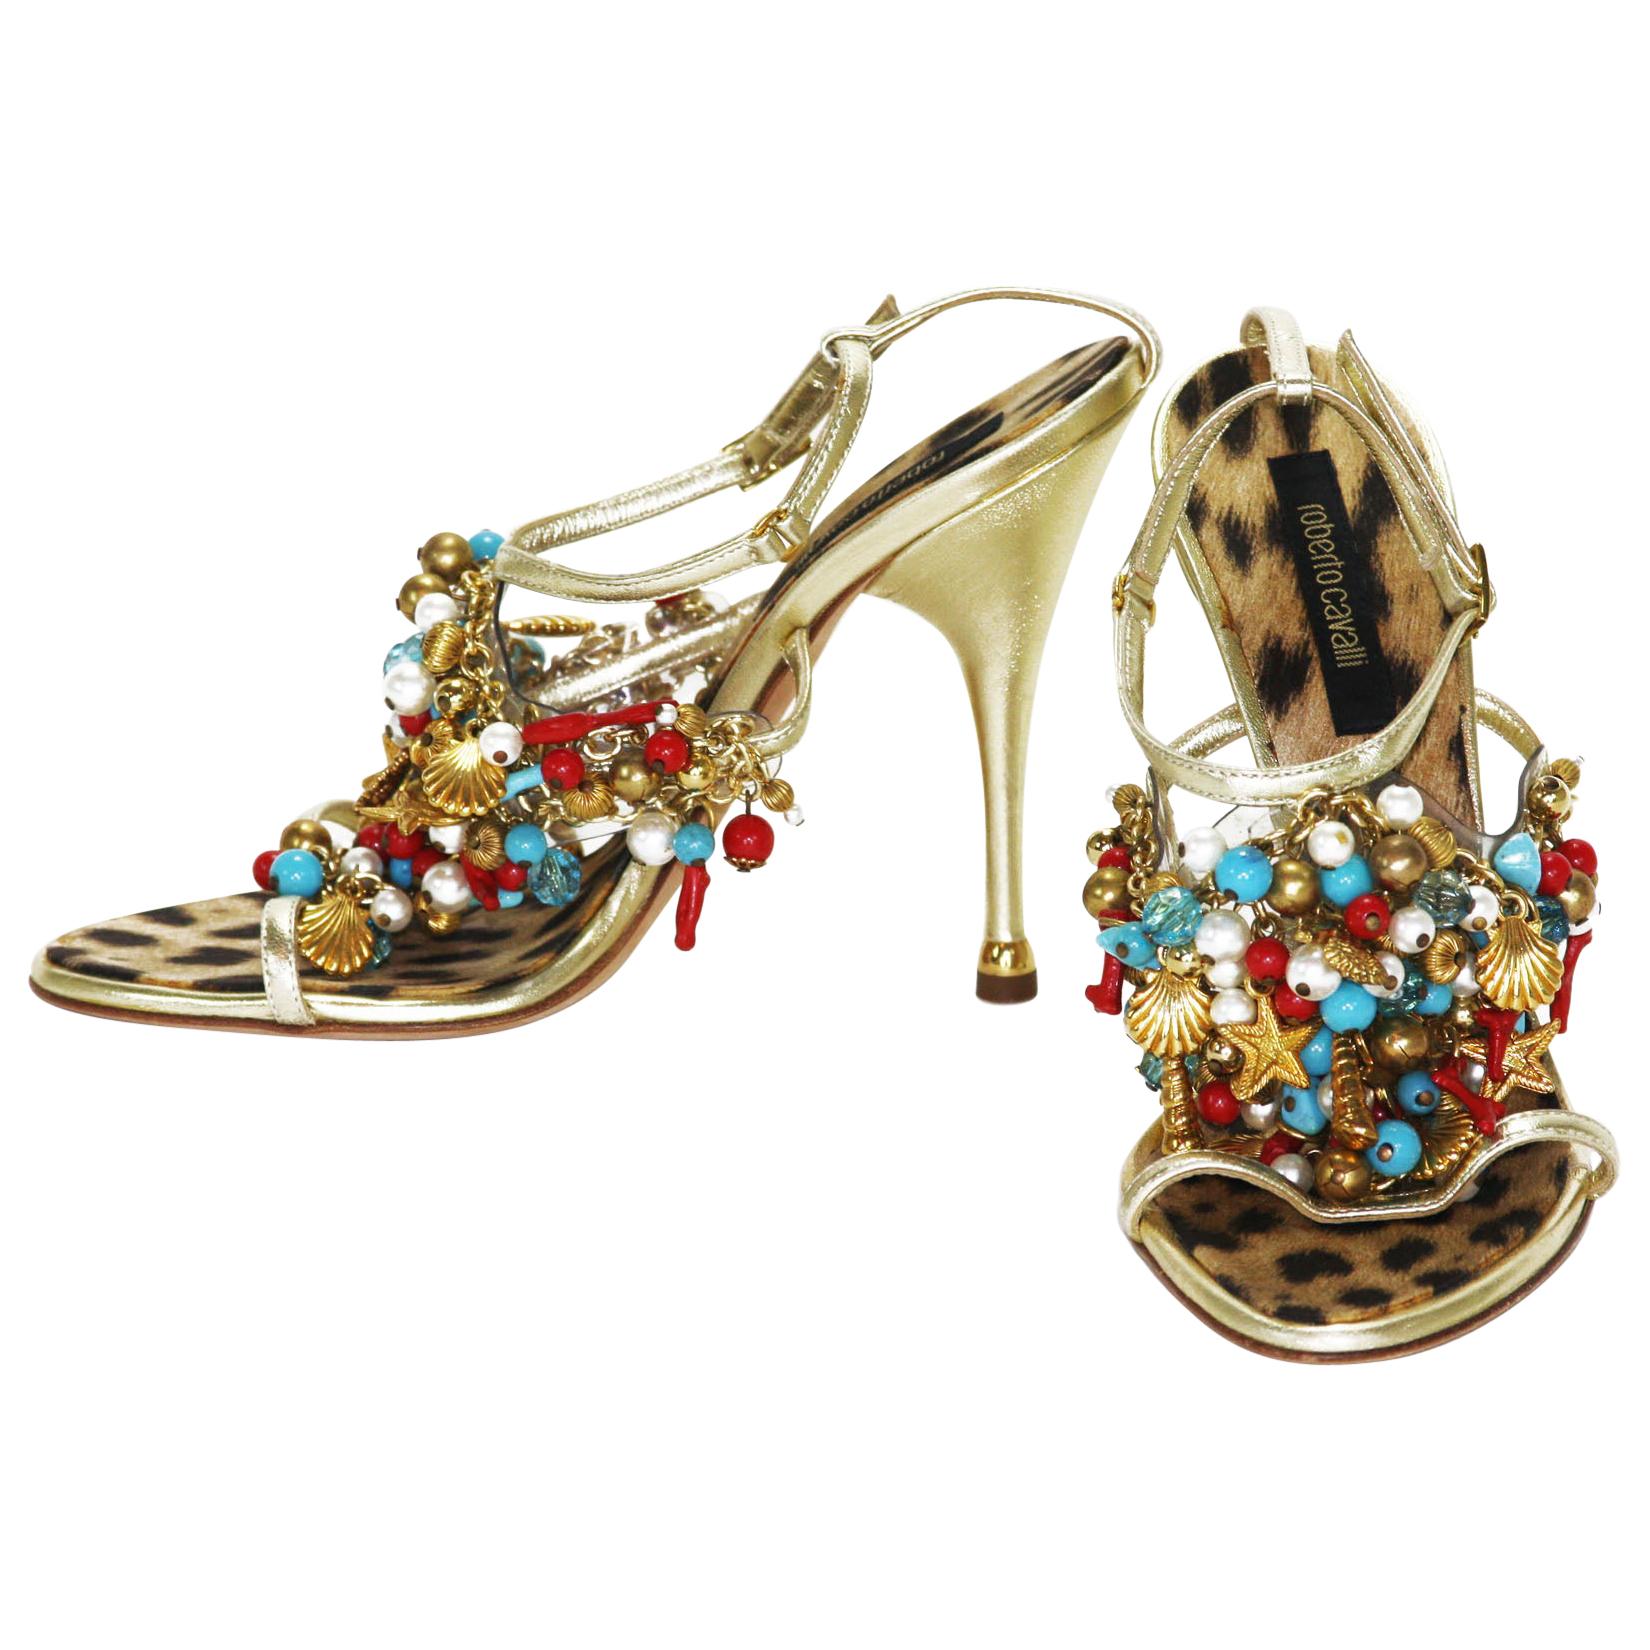 New Roberto Cavalli Embellished Gold Leather Shoes Sandals It.38.5 - US 8.5